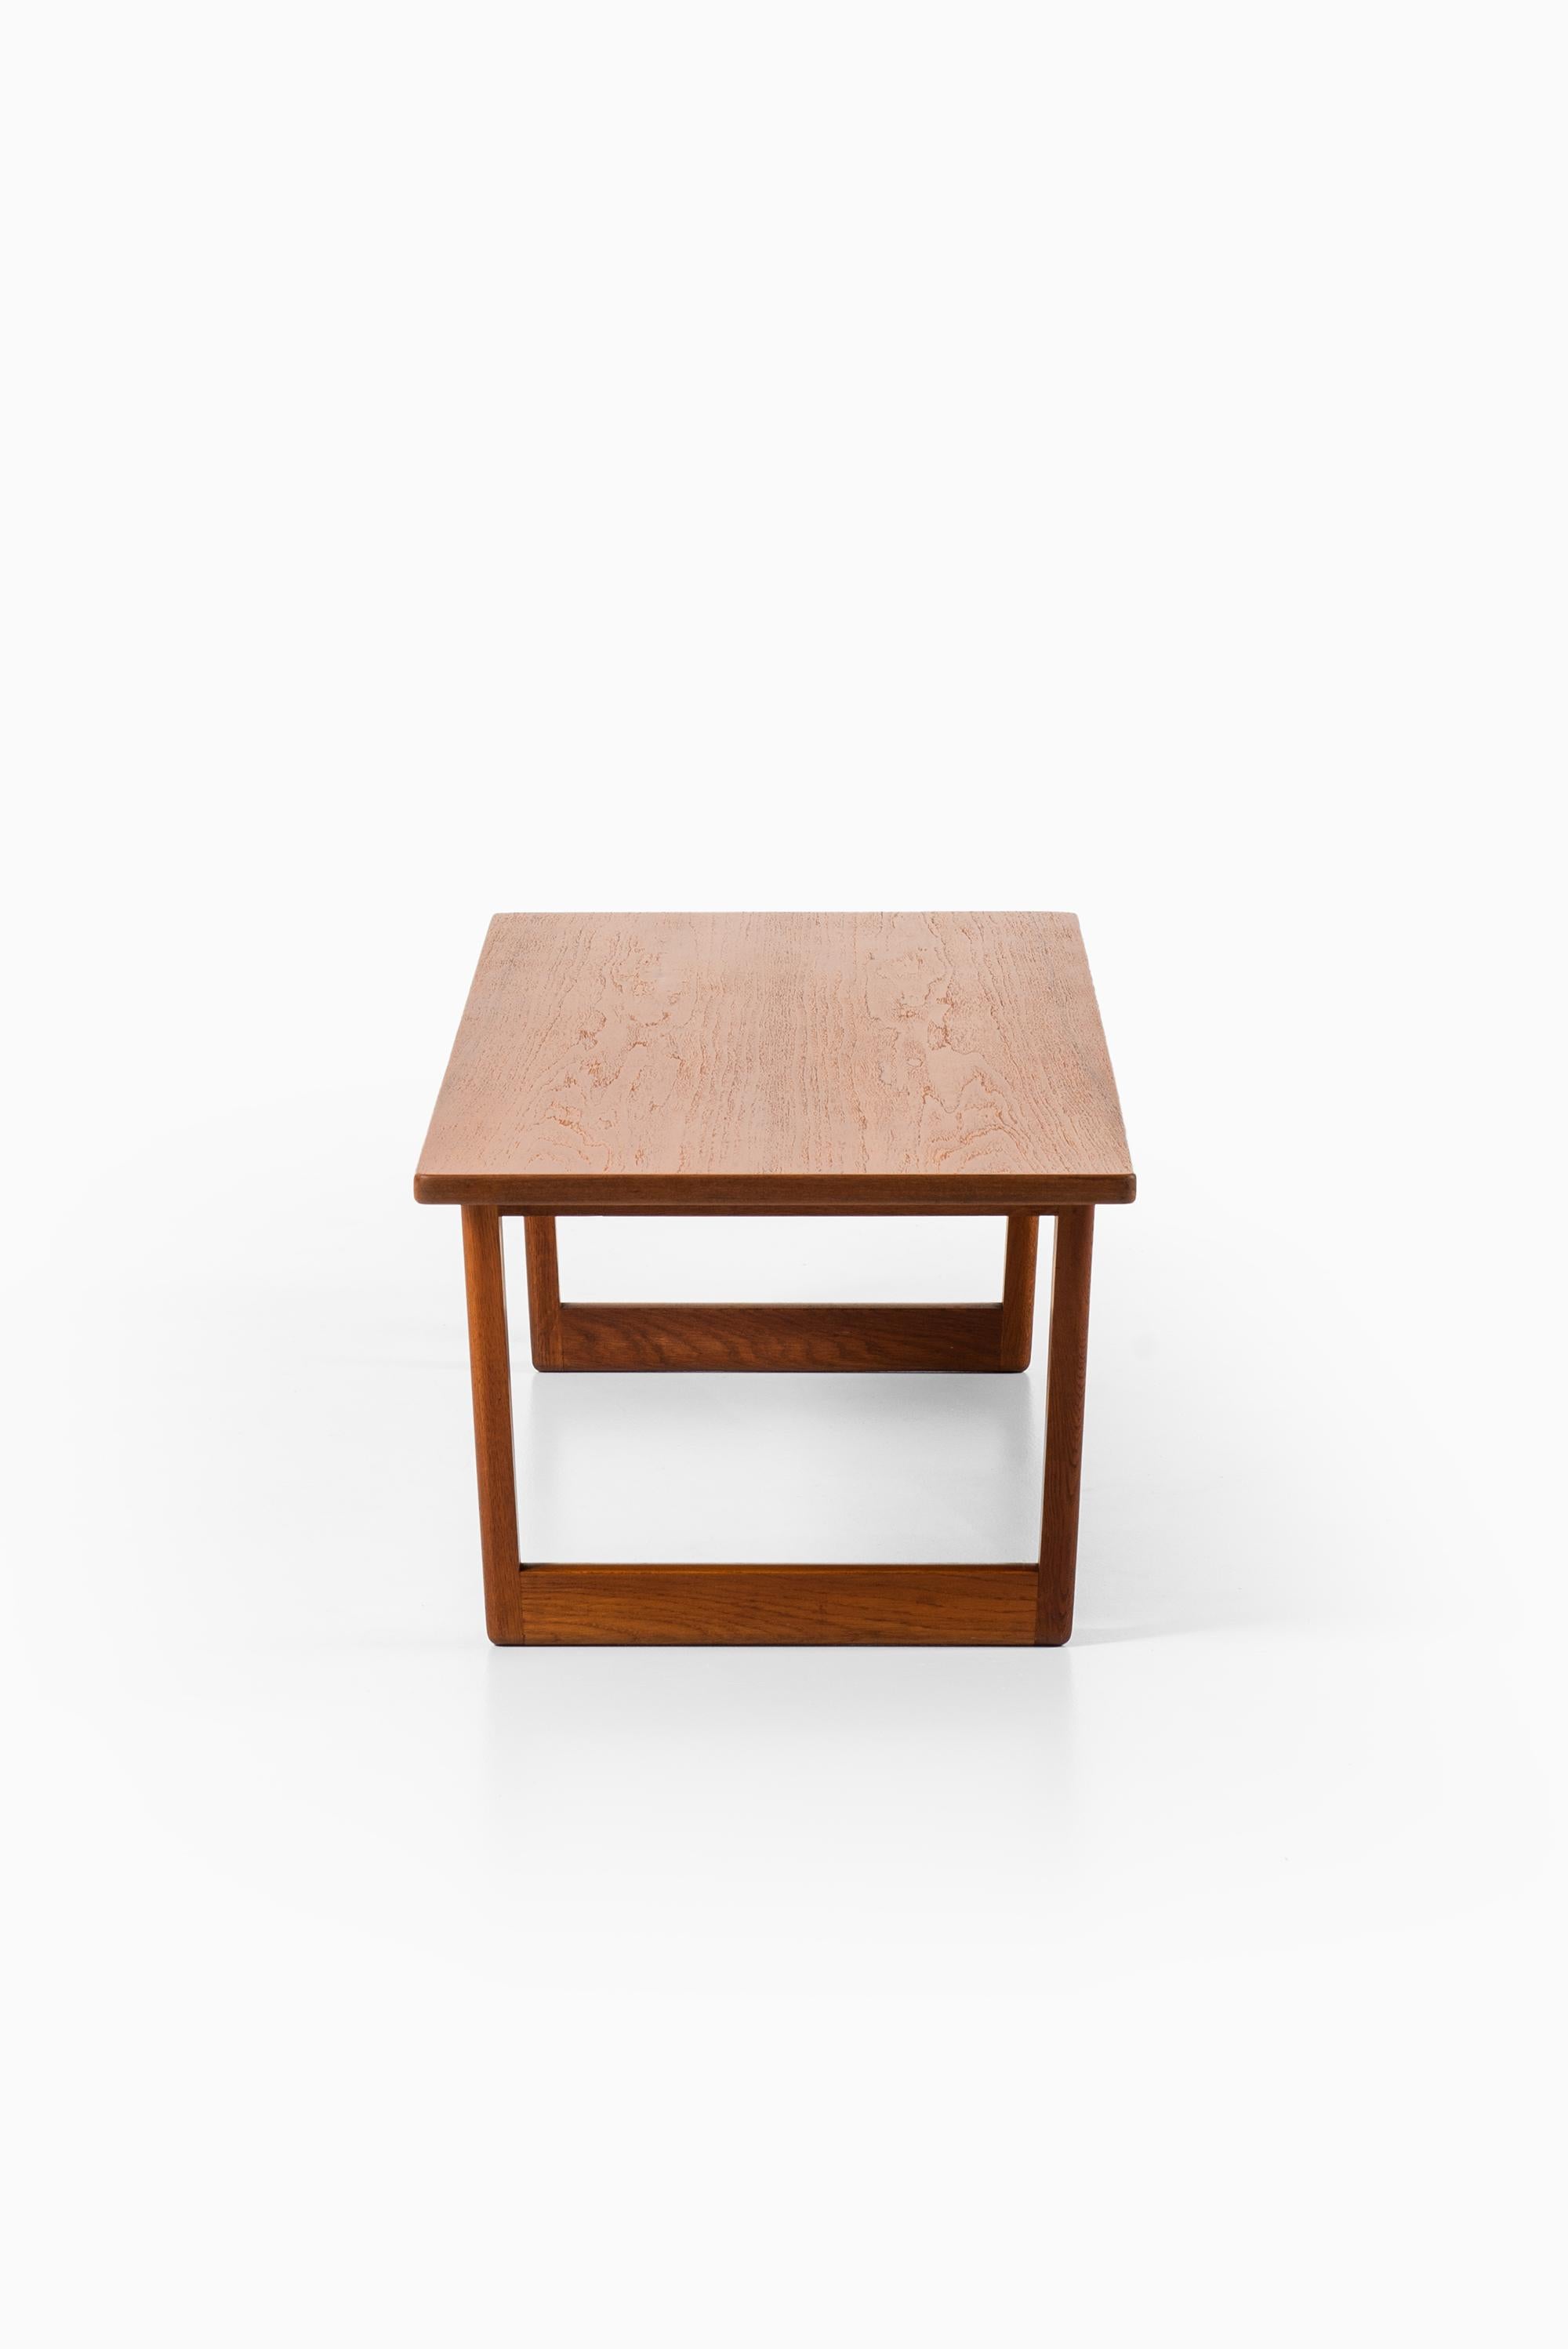 Mid-20th Century Børge Mogensen Coffee / Side Table Model 261 Produced in Denmark For Sale